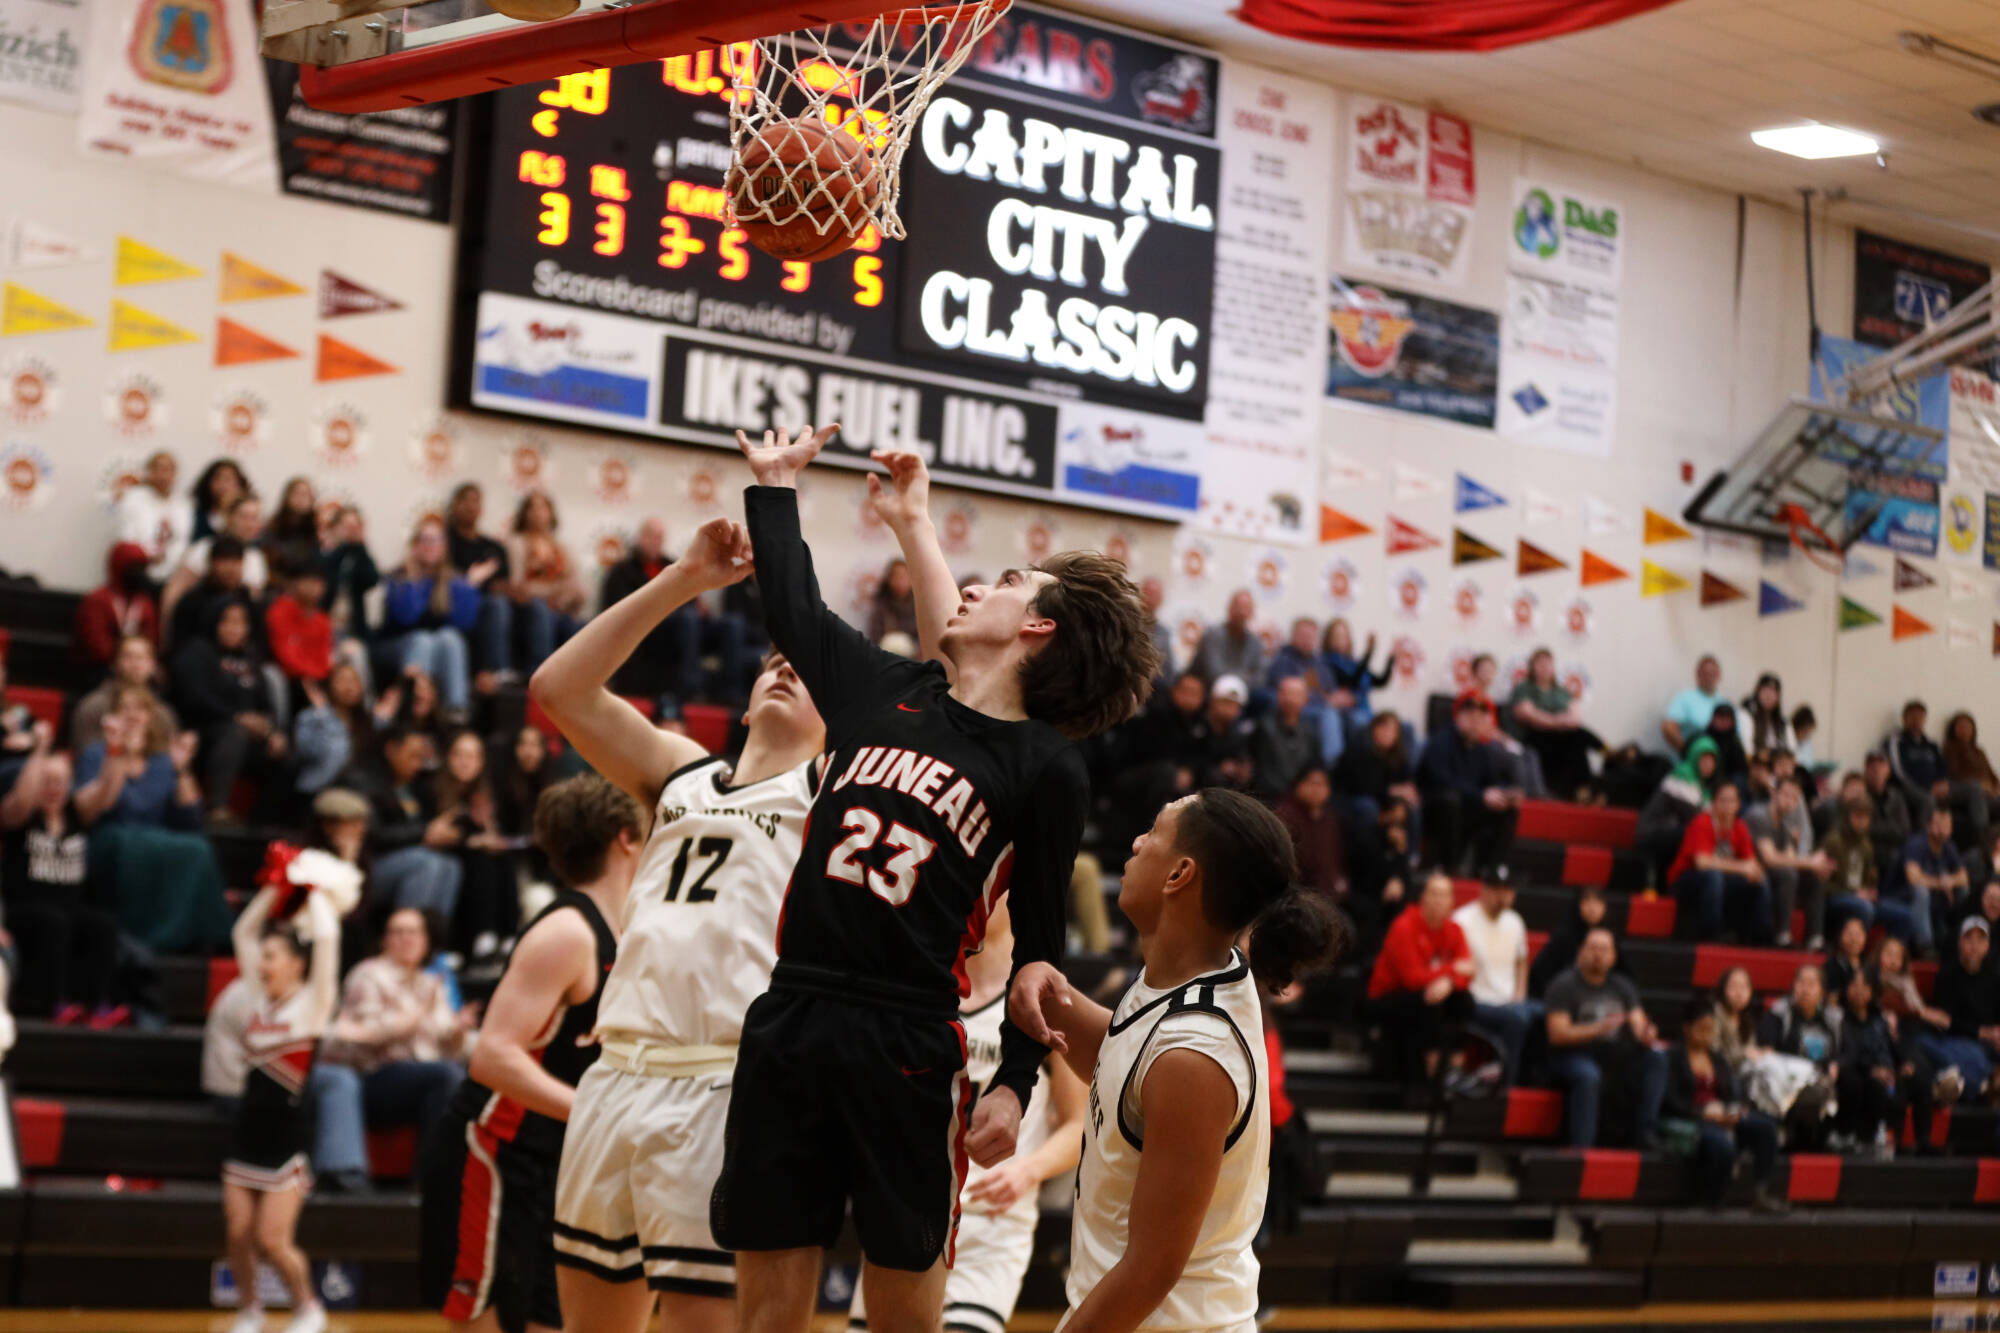 Senior guard Joseph Aline jumps for the ball during the third period during Thursday night’s game against South Anchorage High School during the first night of the Princess Cruises Capital City Classic. (Clarise Larson / Juneau Empire)